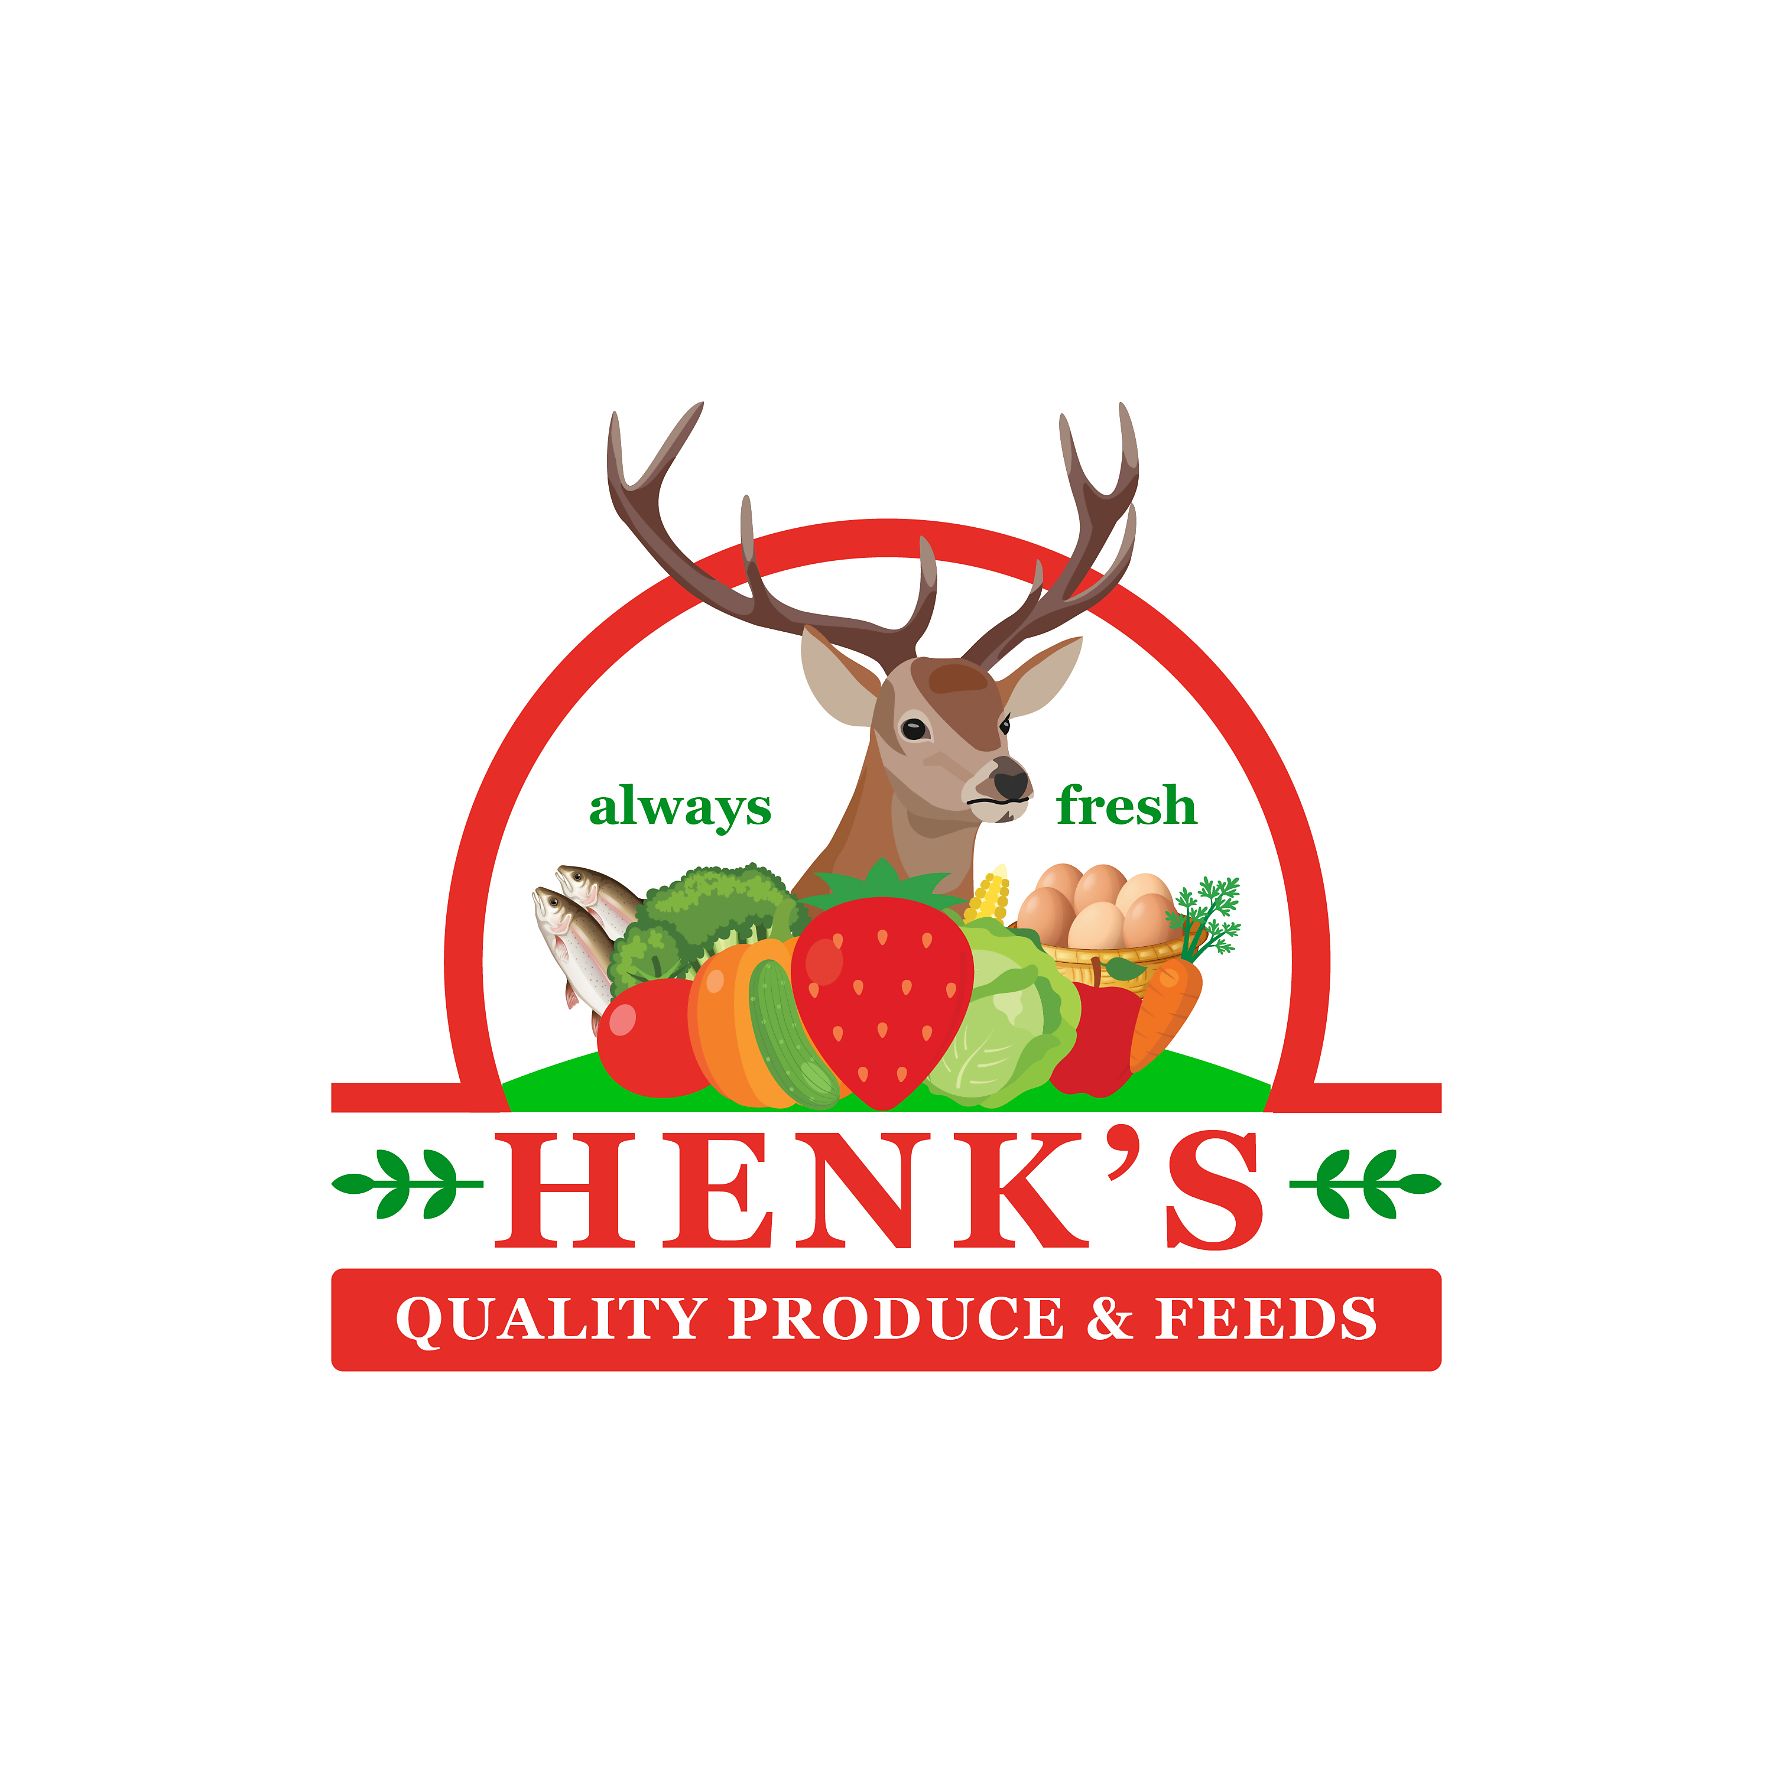 Henk’s Quality Produce & Feeds